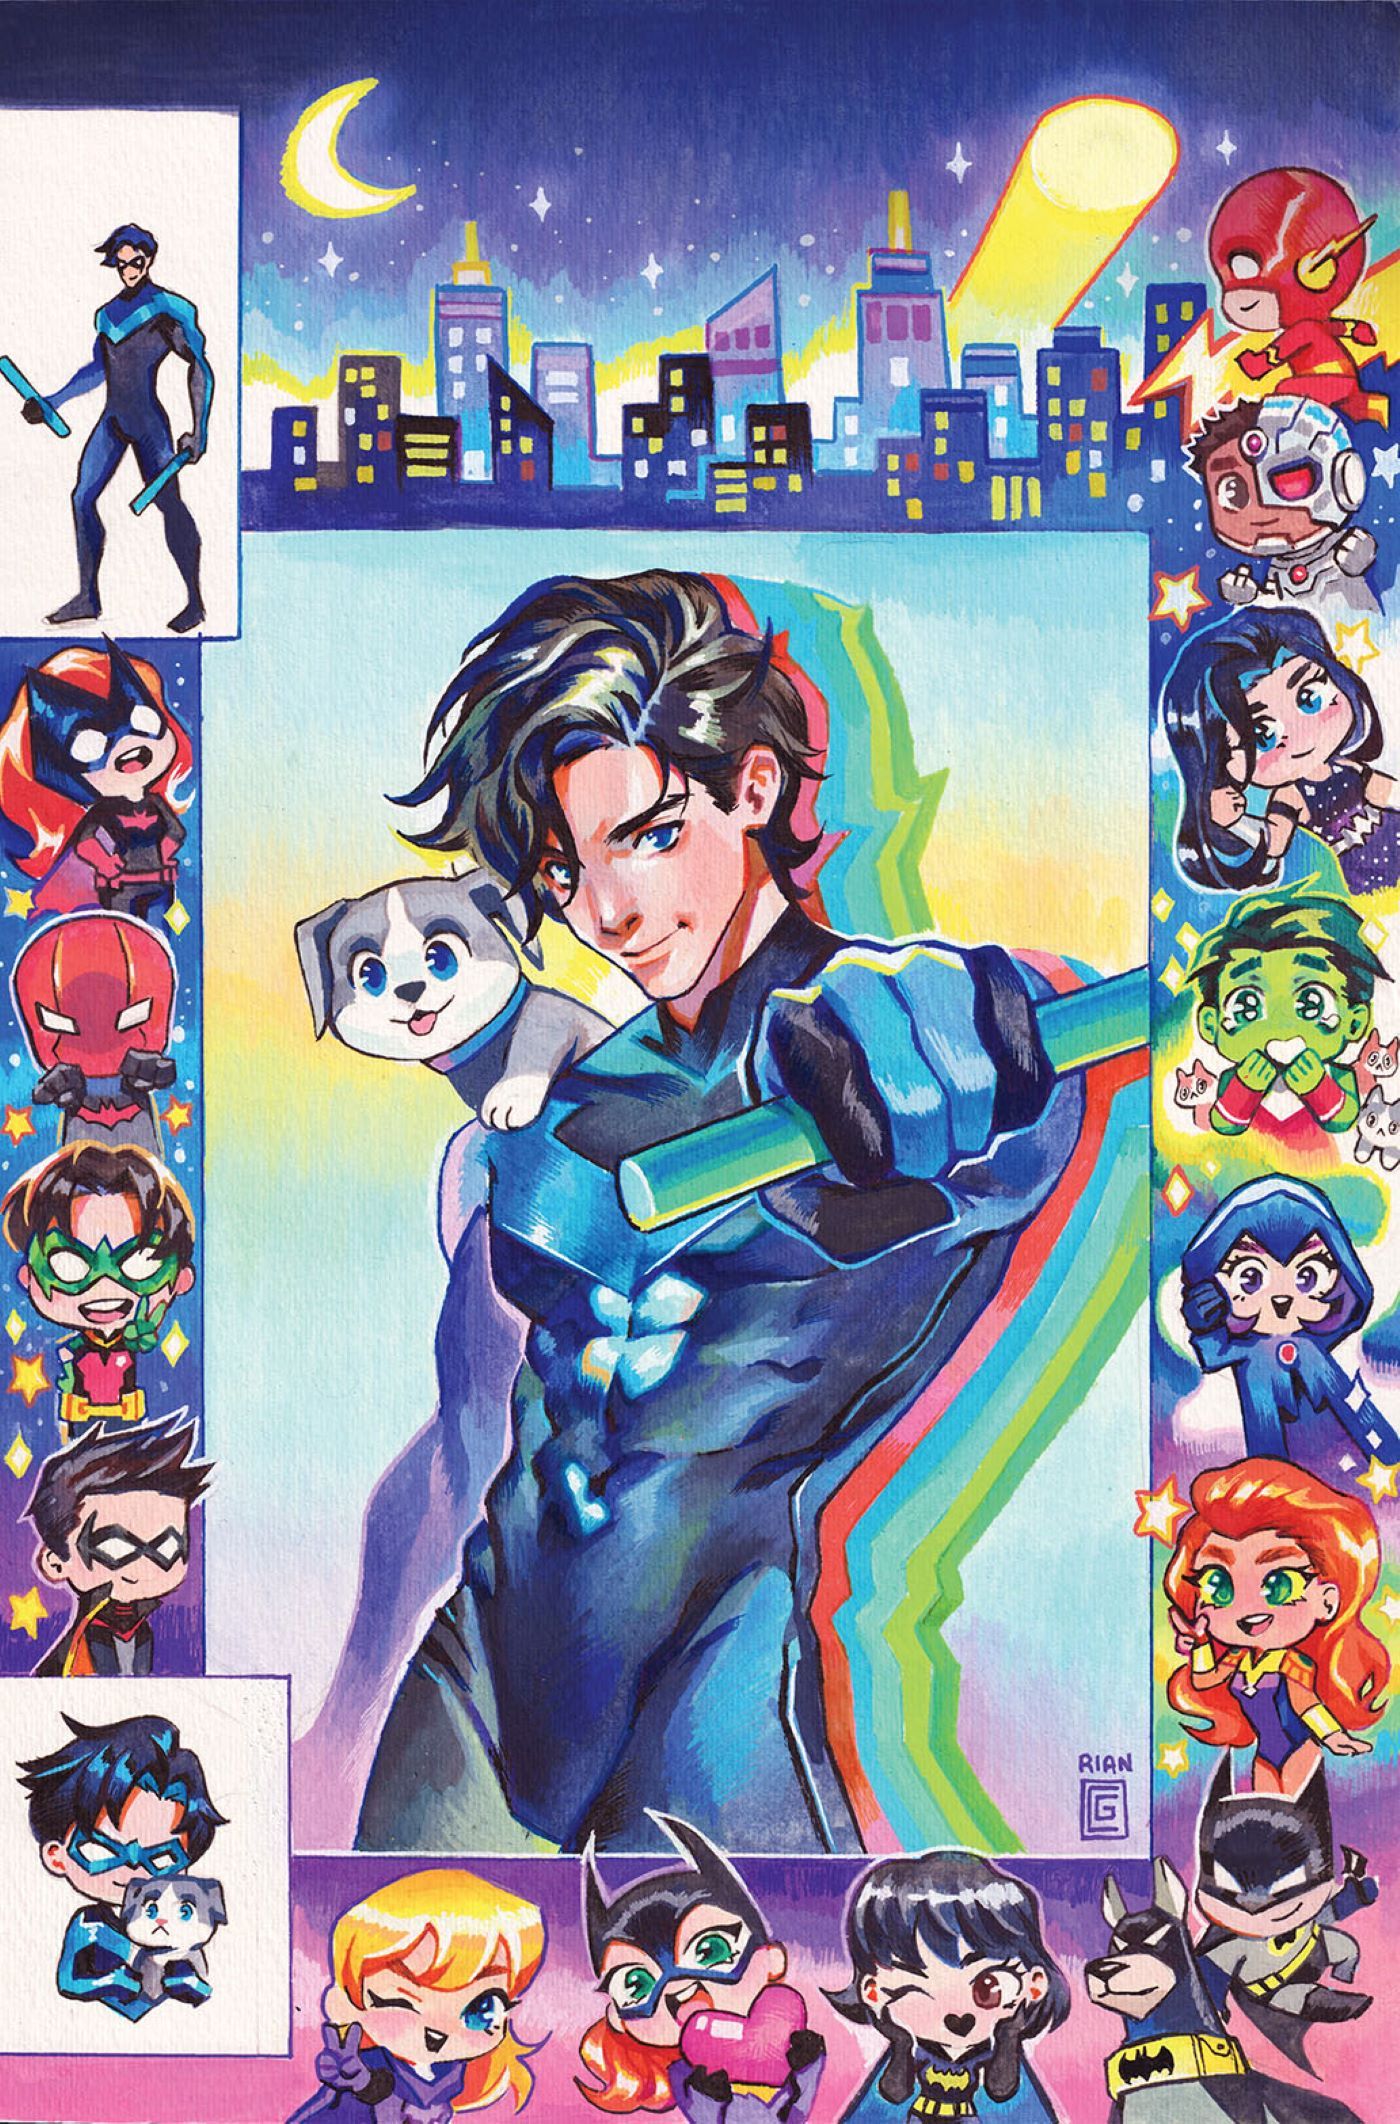 Nightwing 116 Open to Order (Gonzales) variant cover featuring chibi Bat-Family and Titans